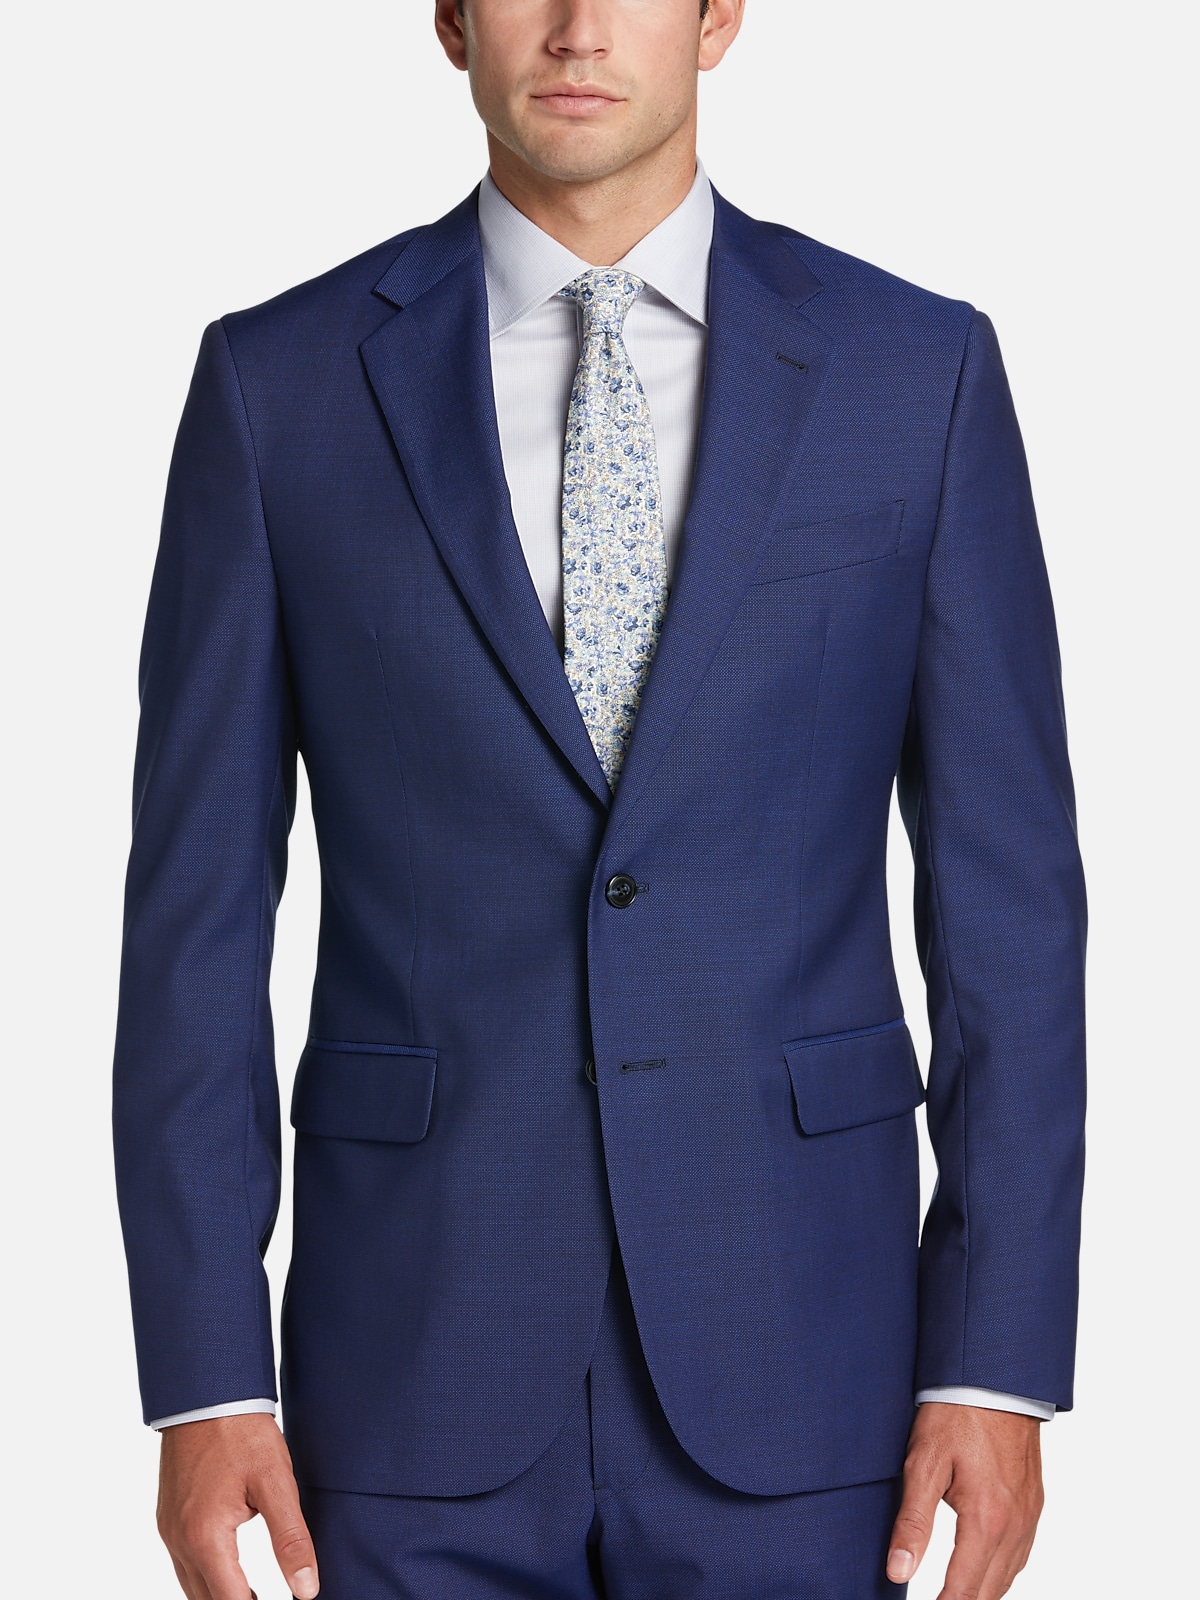 Joseph Abboud Modern Fit Suit Separates Jacket | All Clearance $39.99 ...